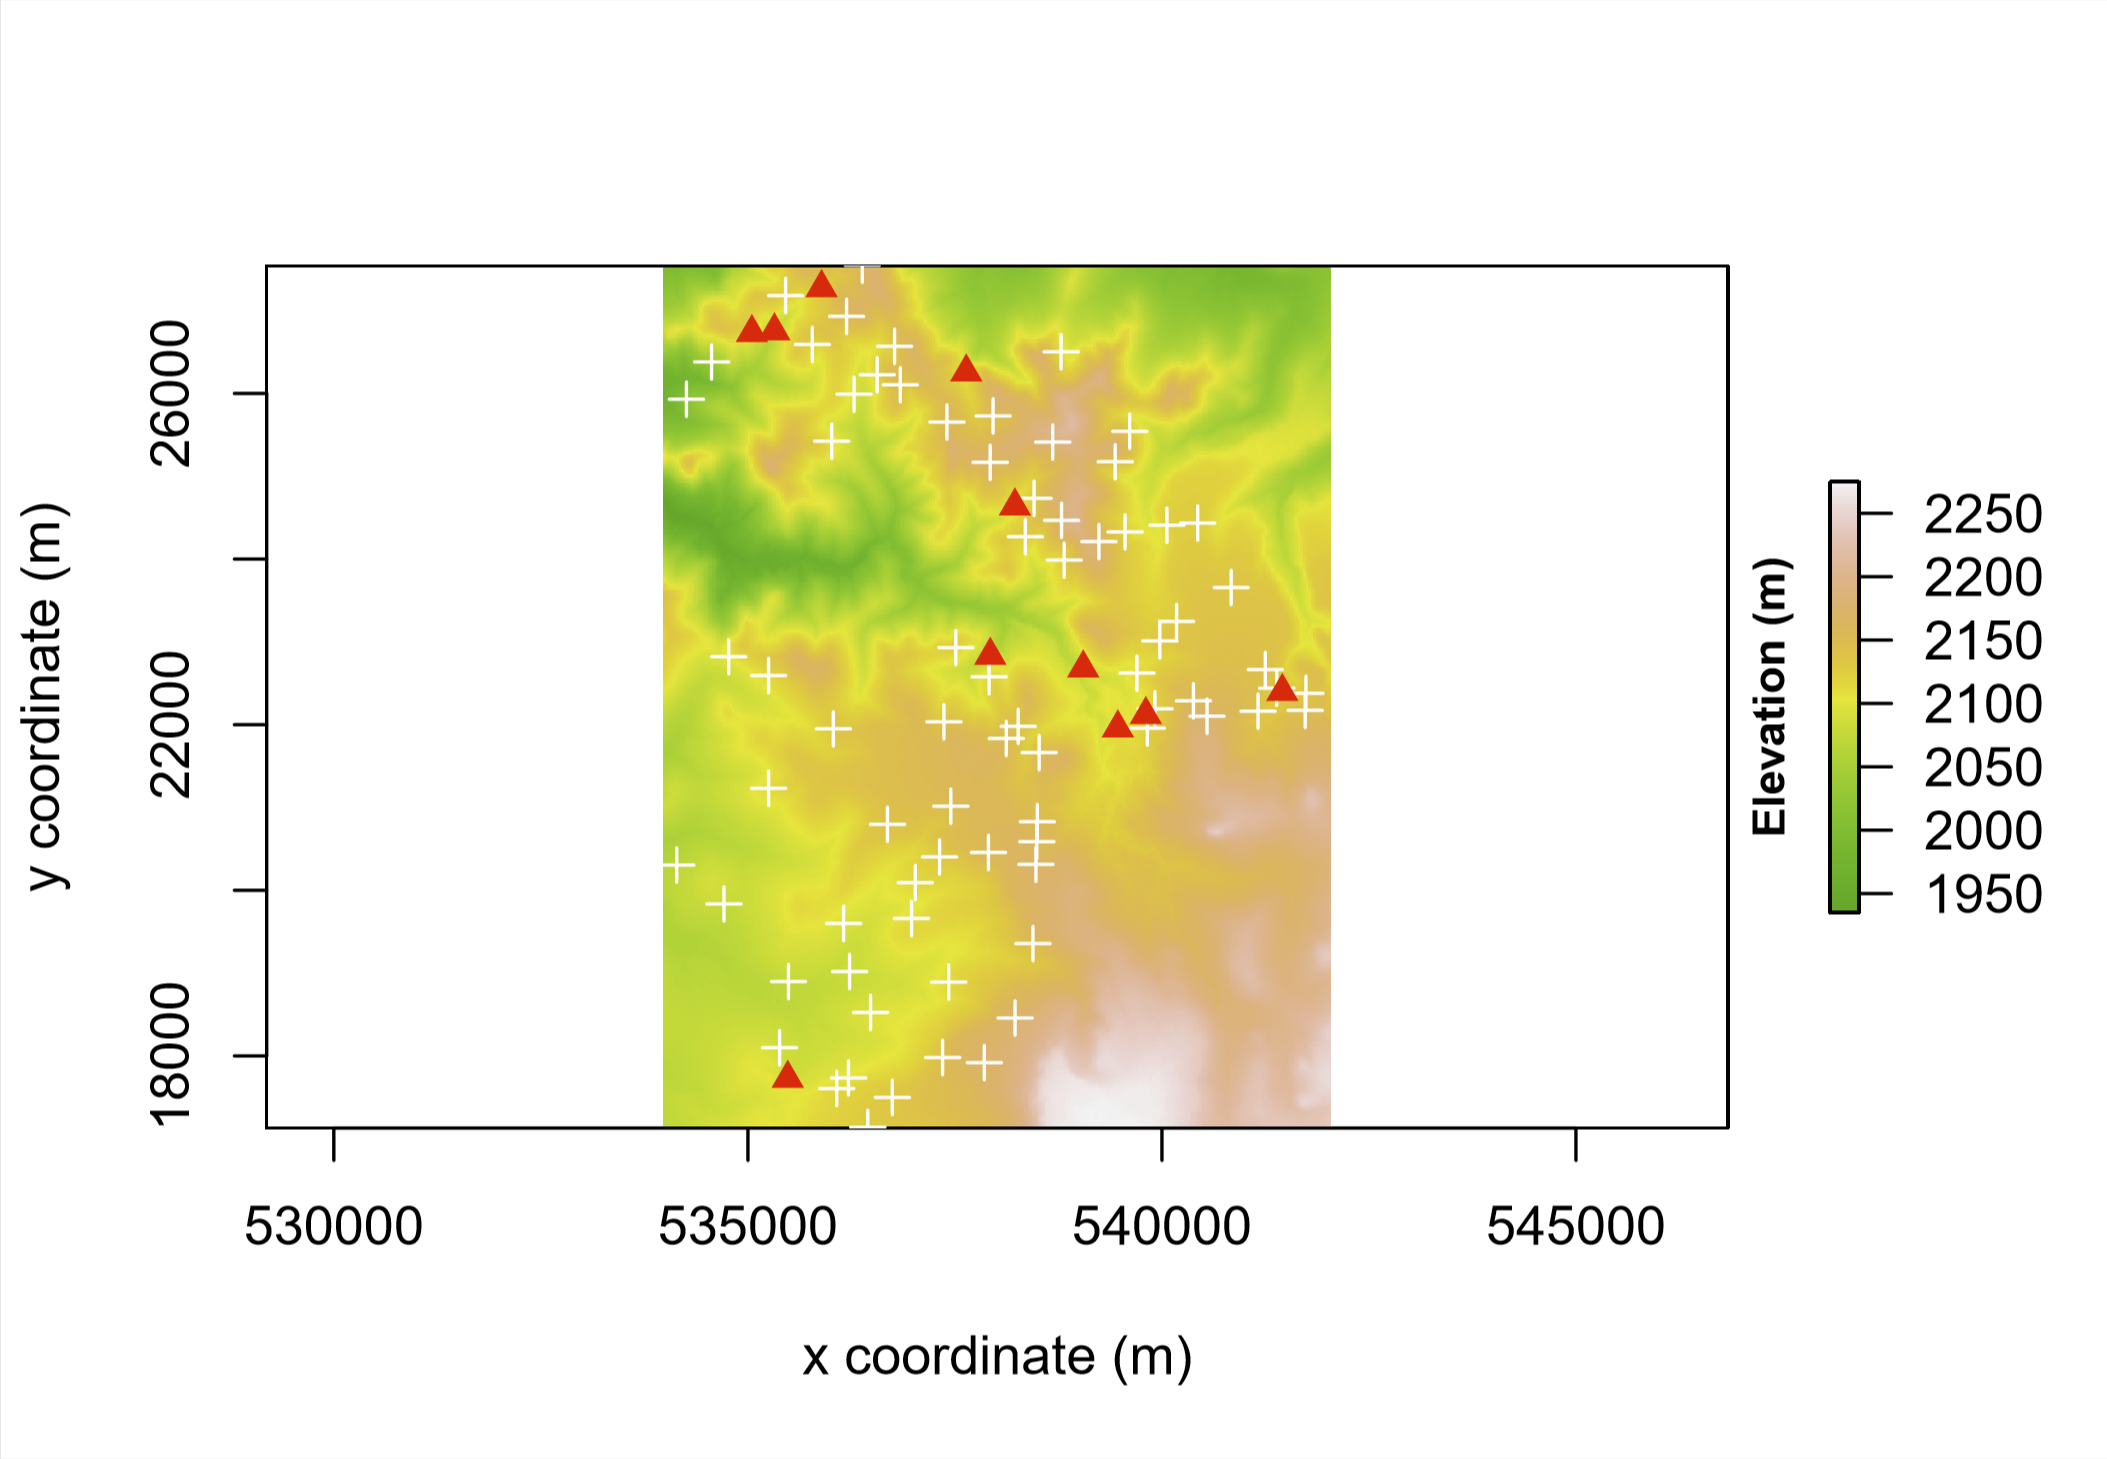 \label{fig:visualization-example-3} Example of visualization: water sources (triangles) and households (circles) in a region in central Kenya (from [Paez et al. (2020)](https://doi.org/10.1016/j.jtrangeo.2019.102564))